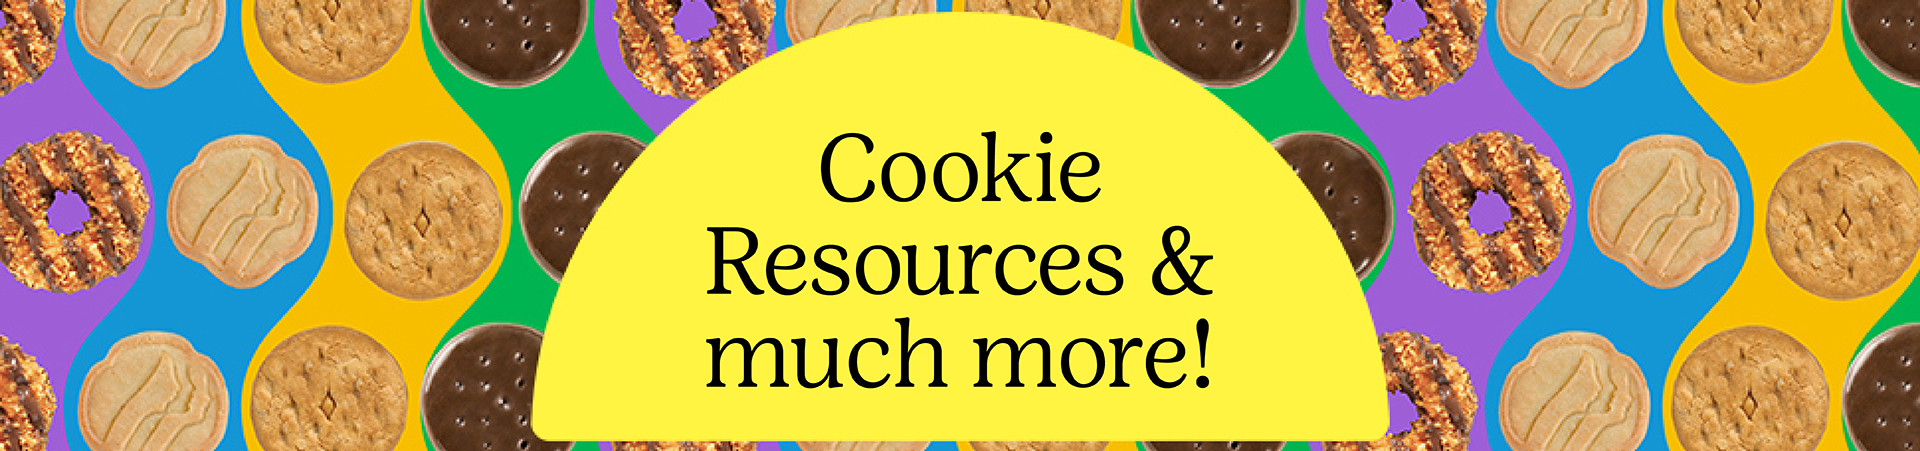  girl scout cookie resources graphic 